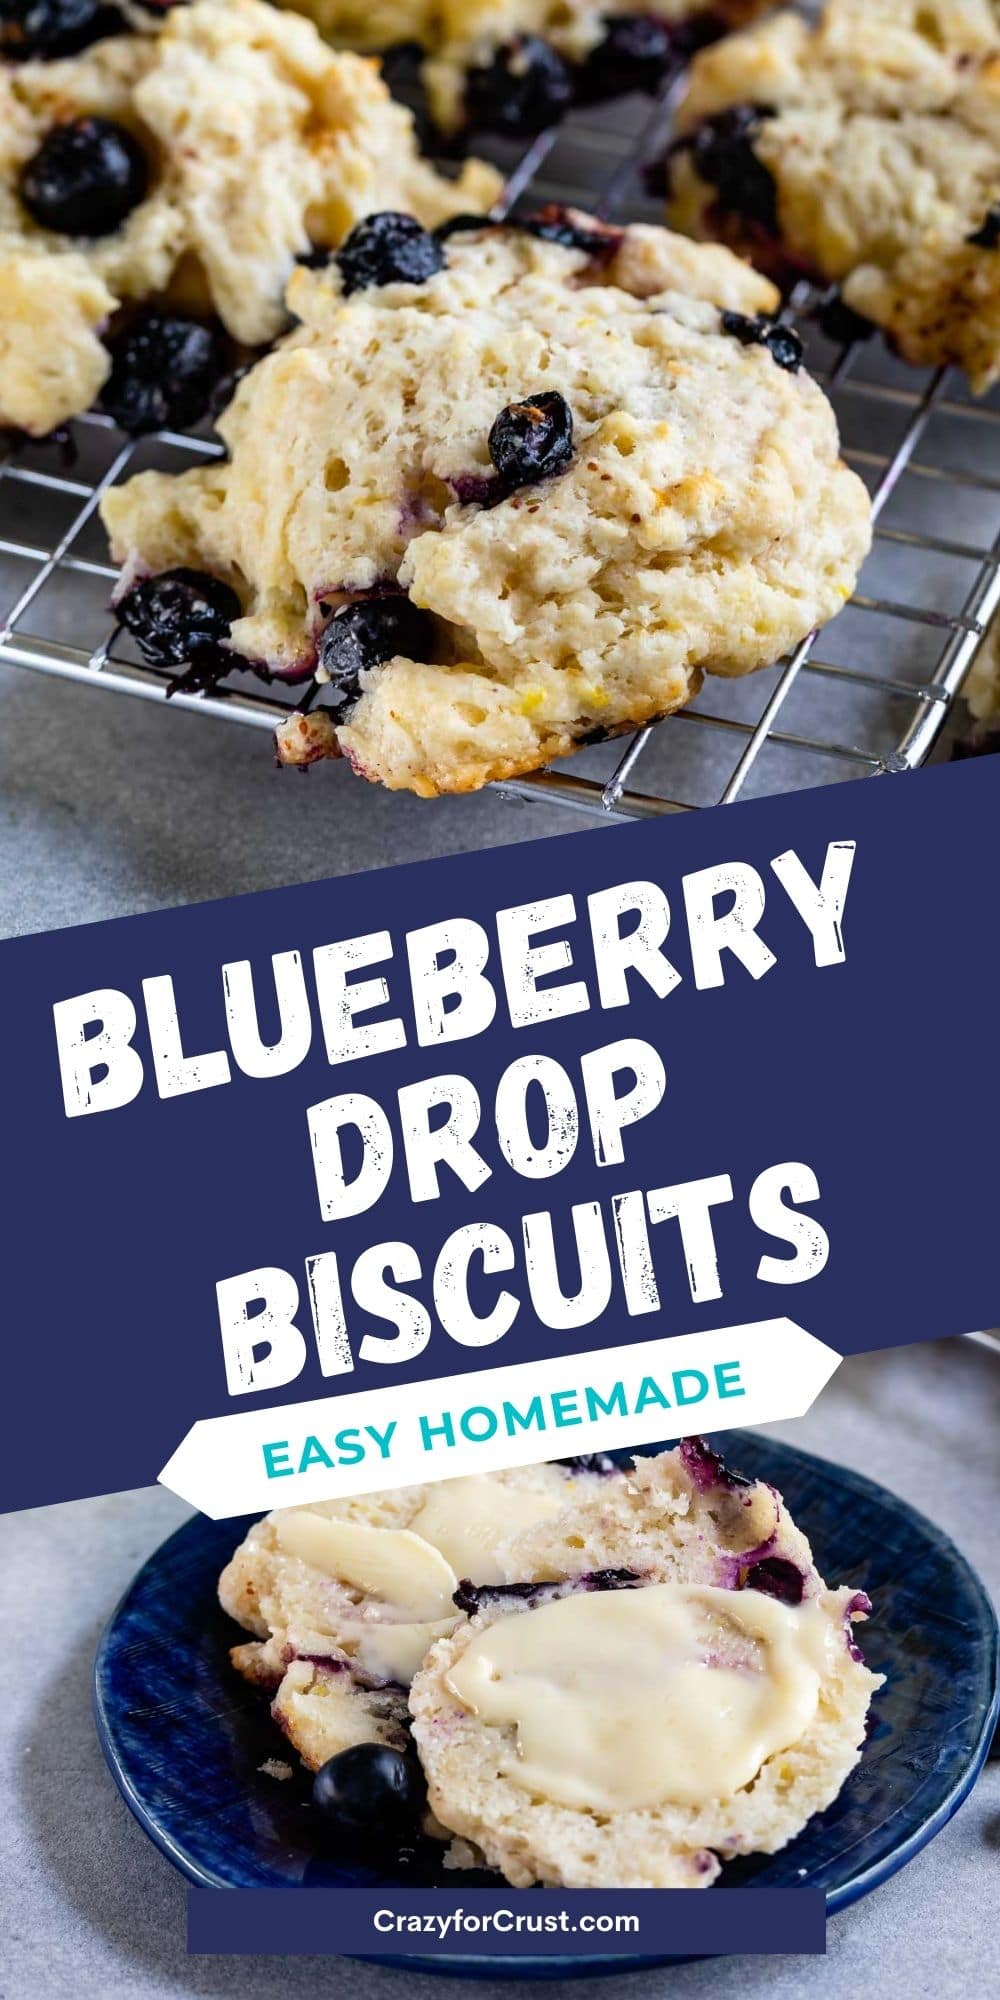 Easy Blueberry Biscuits Recipe (Drop Biscuits) - Crazy for Crust